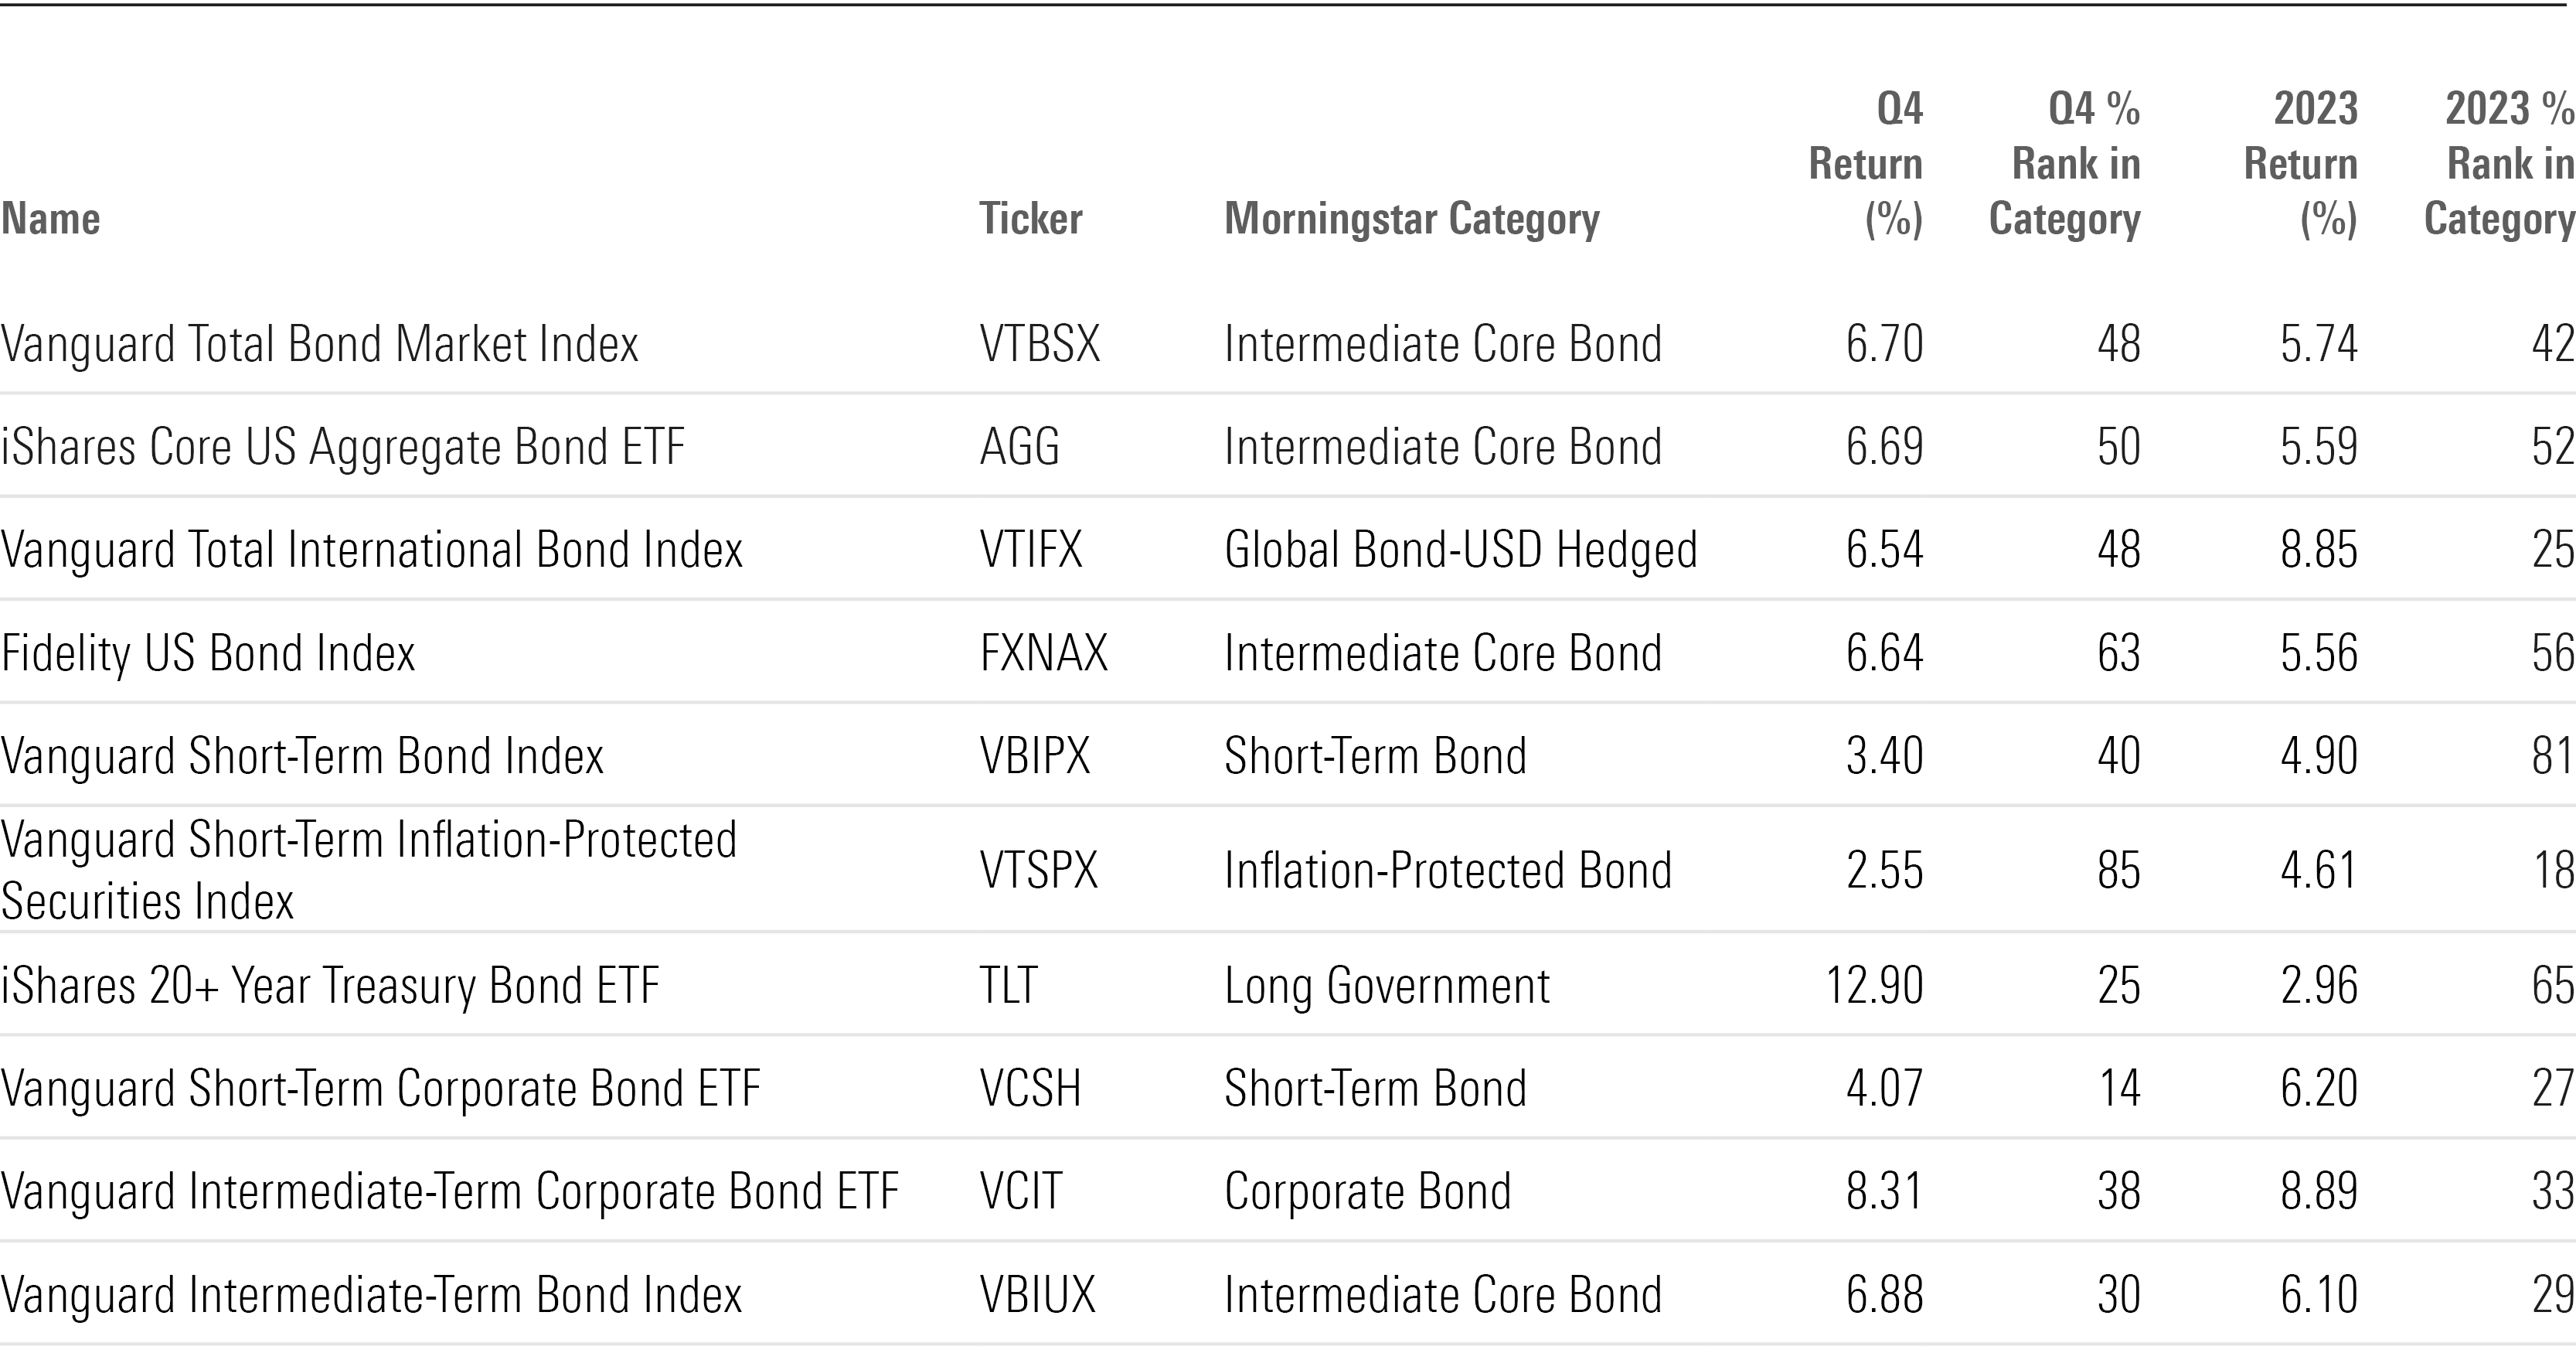 Table showing ticker, Morningstar category, fourth-quarter return, and 2023 return for the 10 largest passive bond funds.